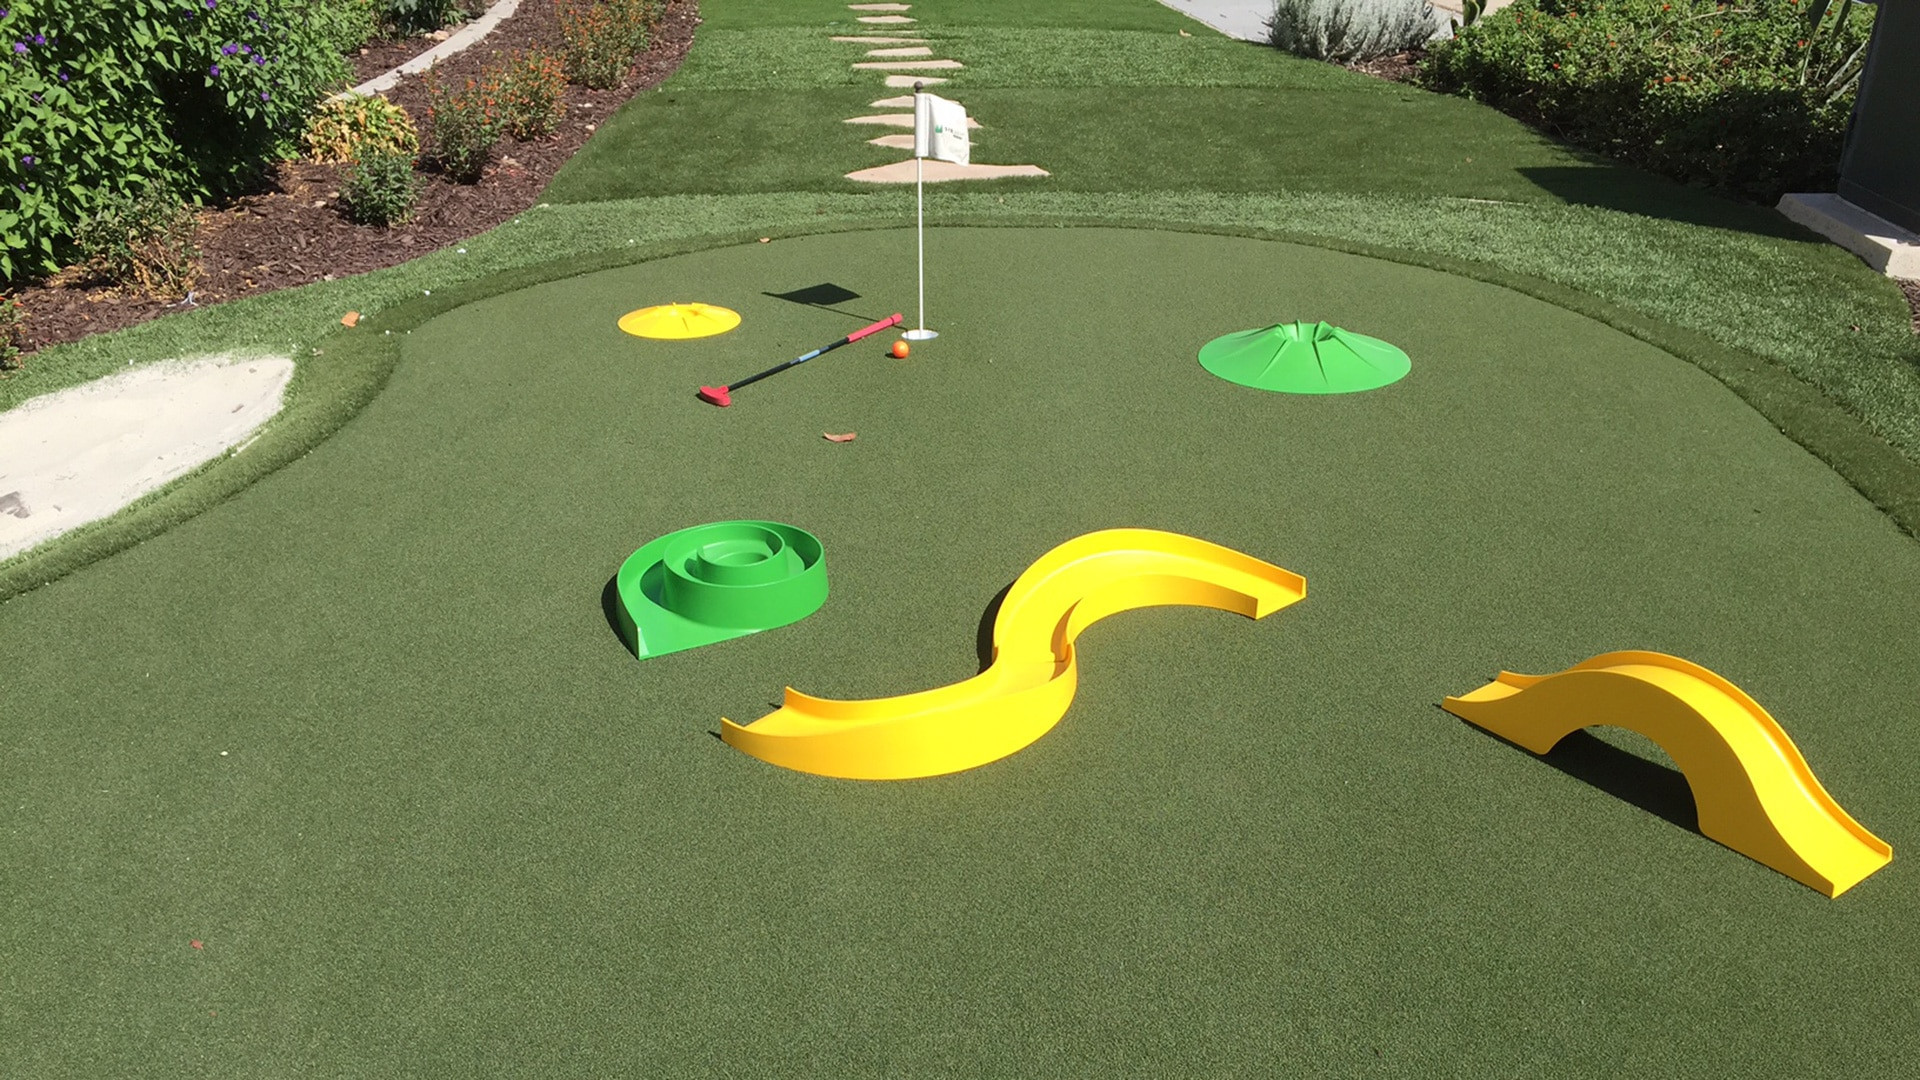 Backyard Putting Green Kit
 5 Ways to Add Outdoor Play to Your Yard SYNLawn